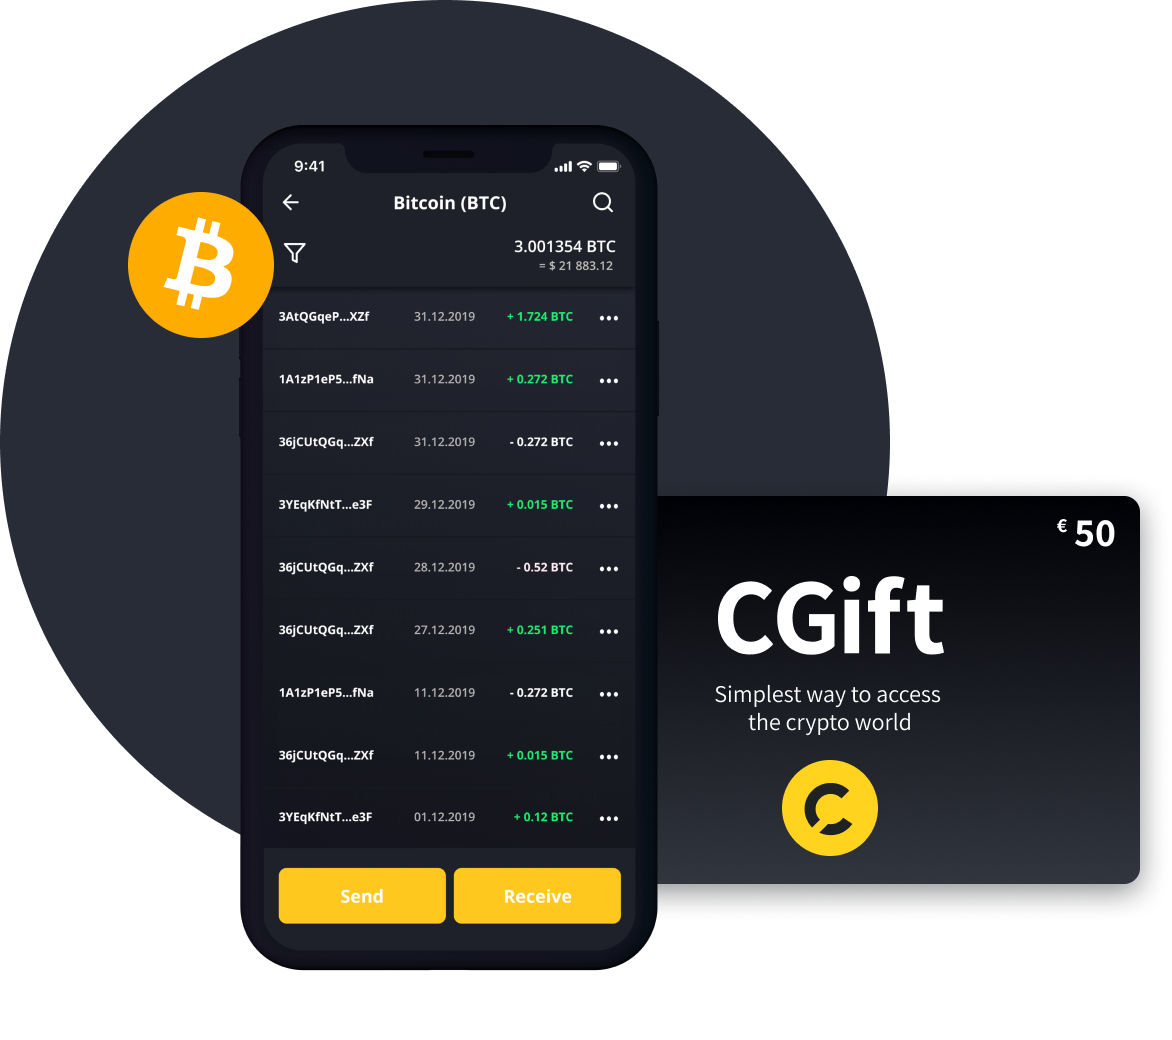 Bitcoin with gift card onlikeys com отзывы